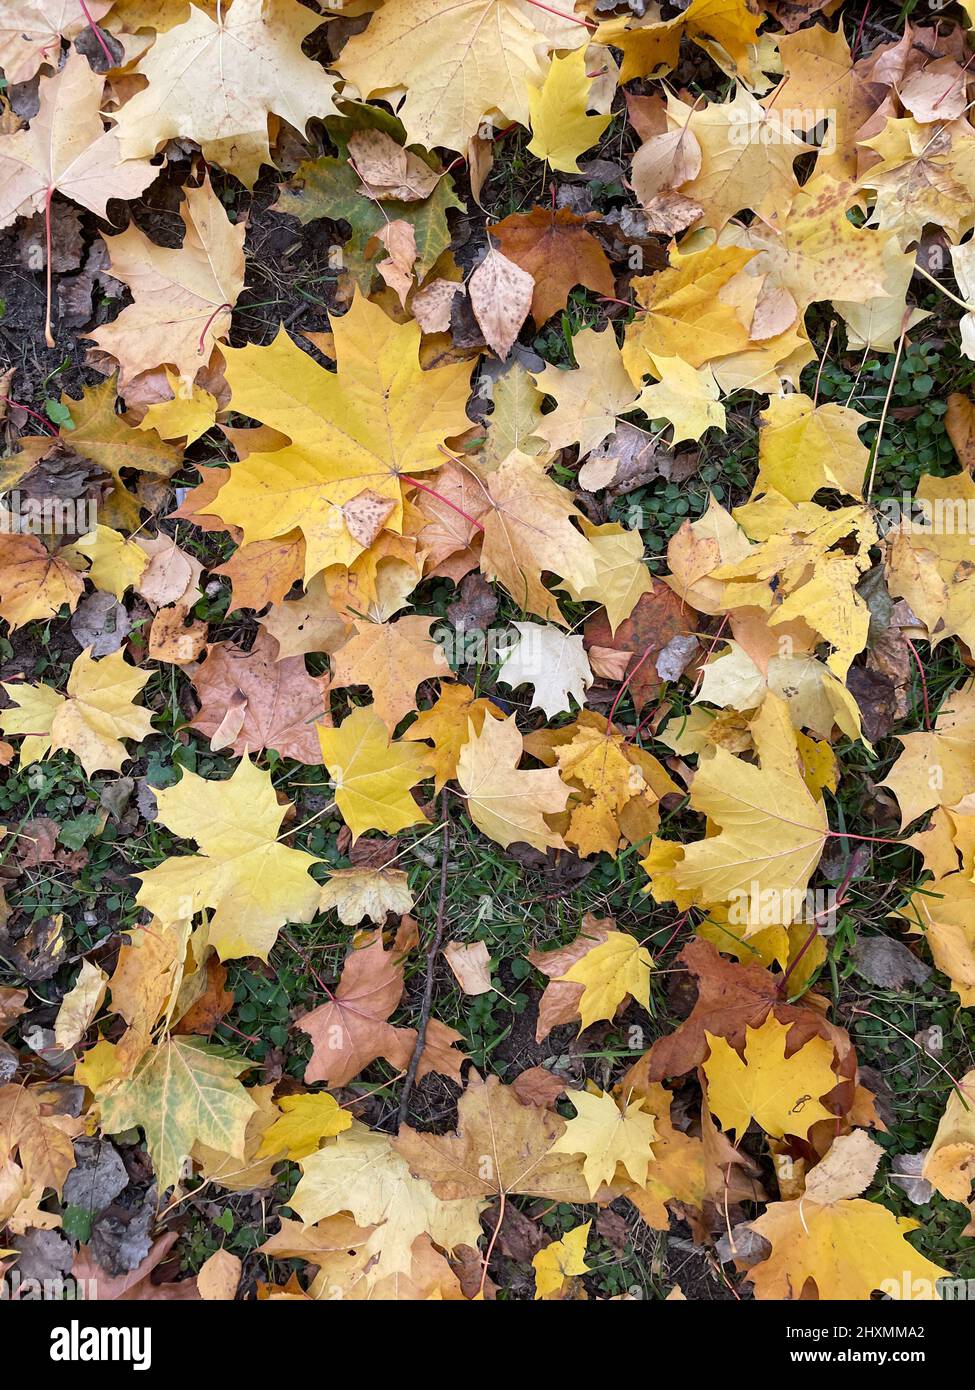 Autumn background with multicolored maple leaves on the ground. Stock Photo